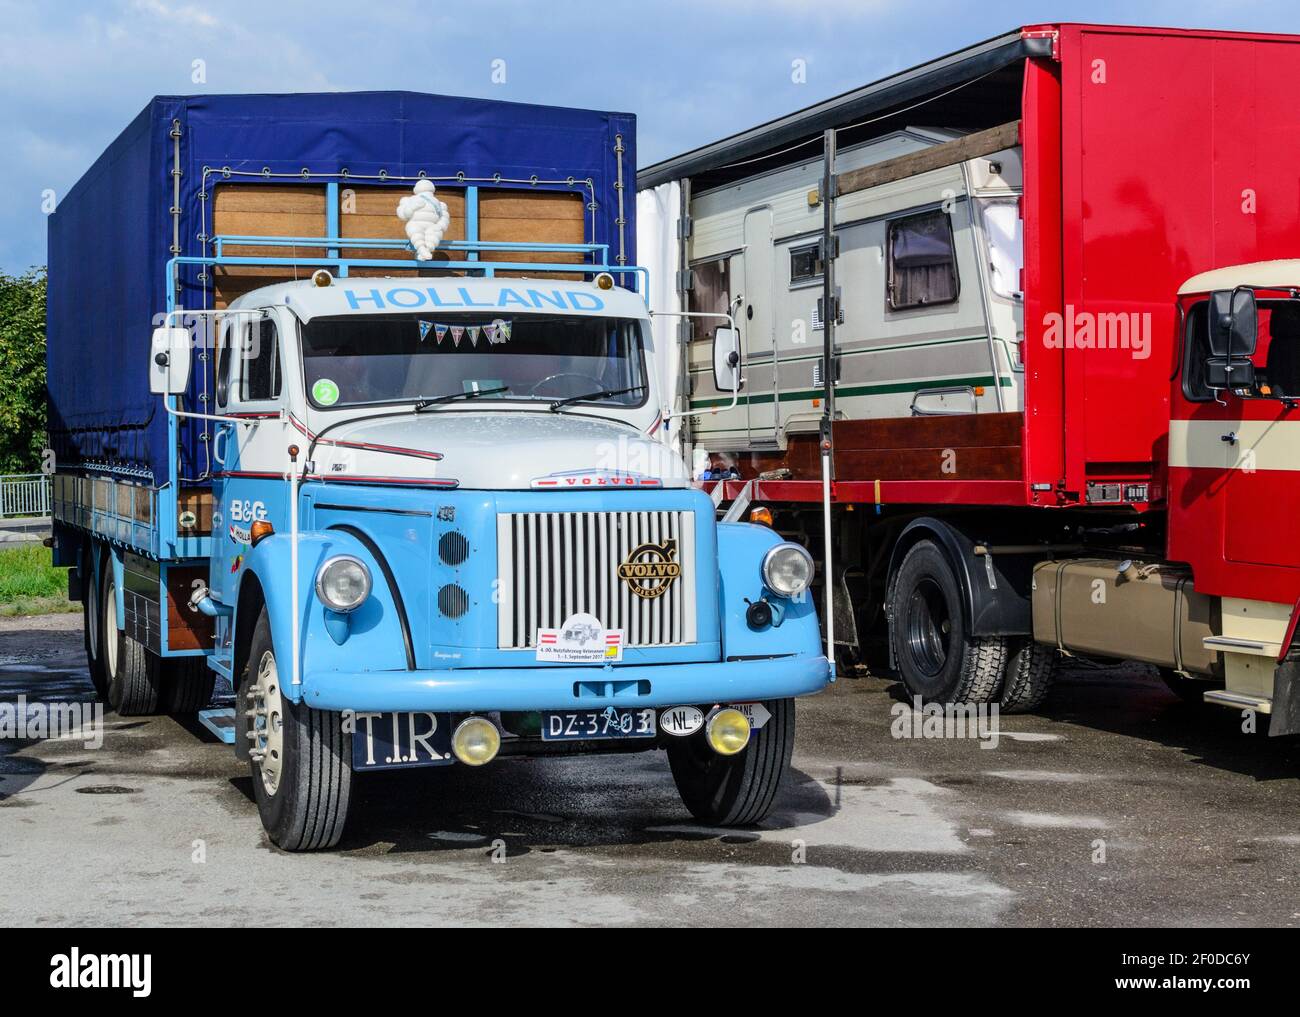 st.valentin, austria, 01 sep 2017, volvo vintage truck at an oldtimer truck meeting, meeting for vintage trucks and tractors Stock Photo